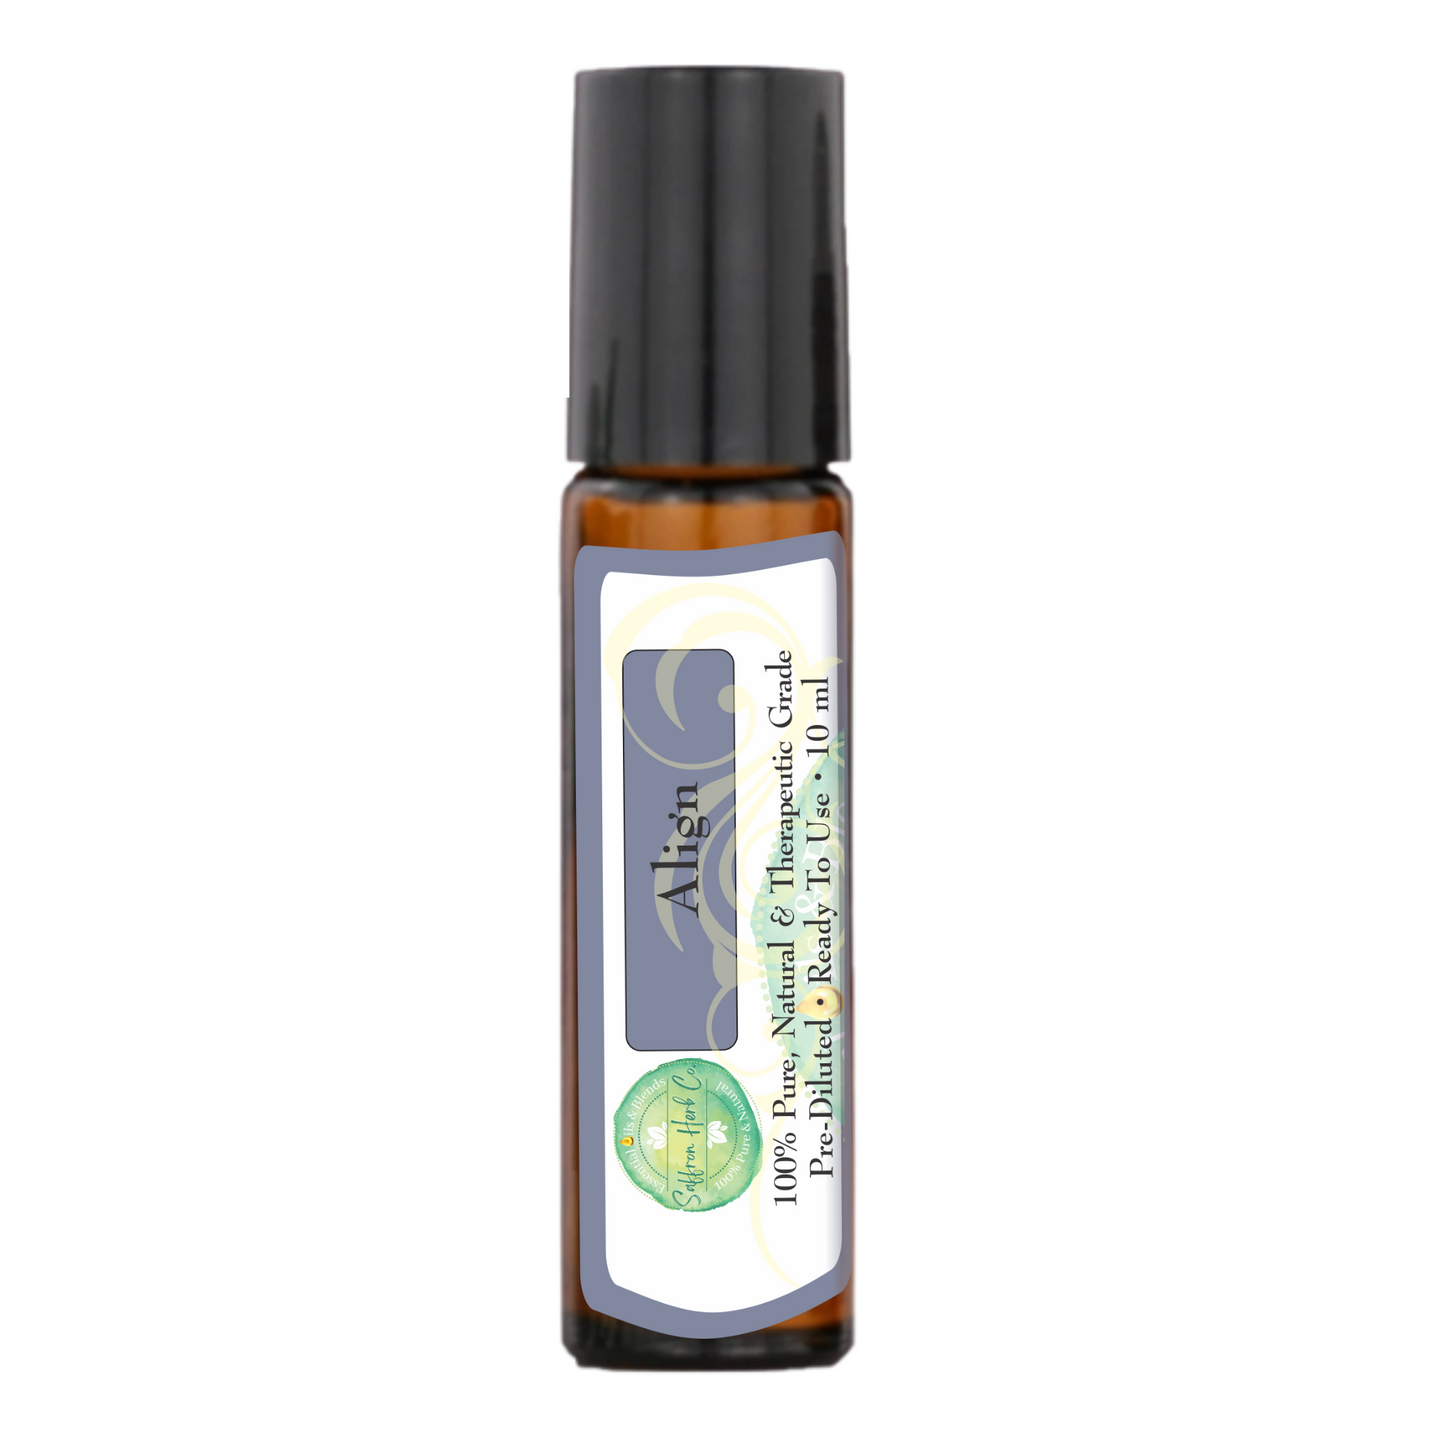 Align™ Essential Oil Roller Bottle Blend • 100% Pure & Natural • Pre-Diluted • Ready To Use